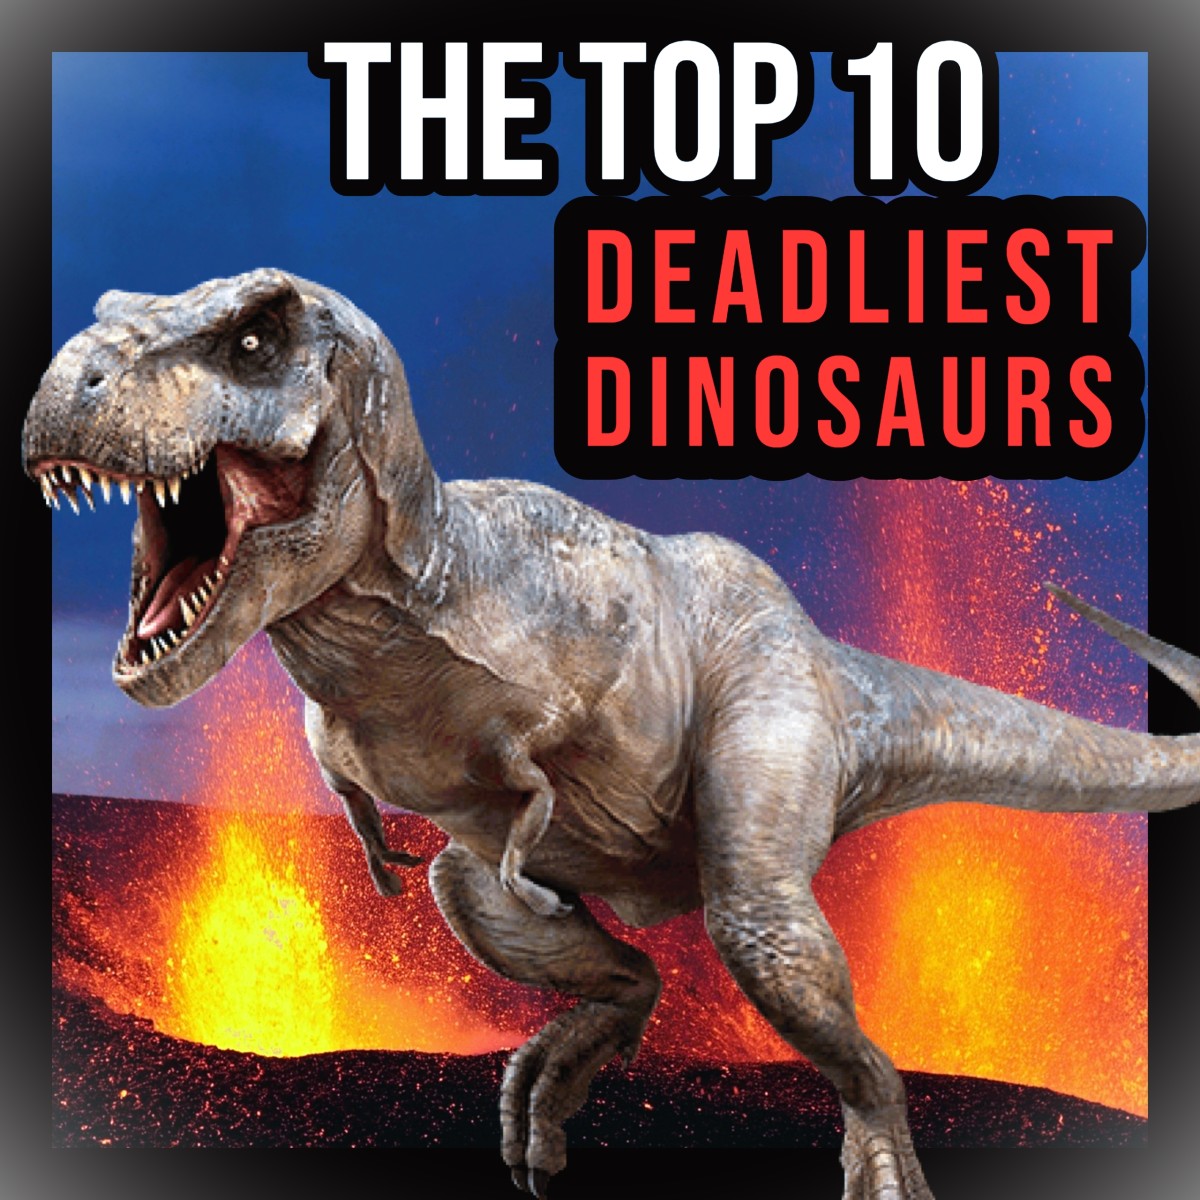 From the Velociraptor to the Tyrannosaurus Rex, this article ranks the 10 deadliest dinosaurs of all time. Did your favorite dinosaur make the final 10 in our list? Read on to find out!